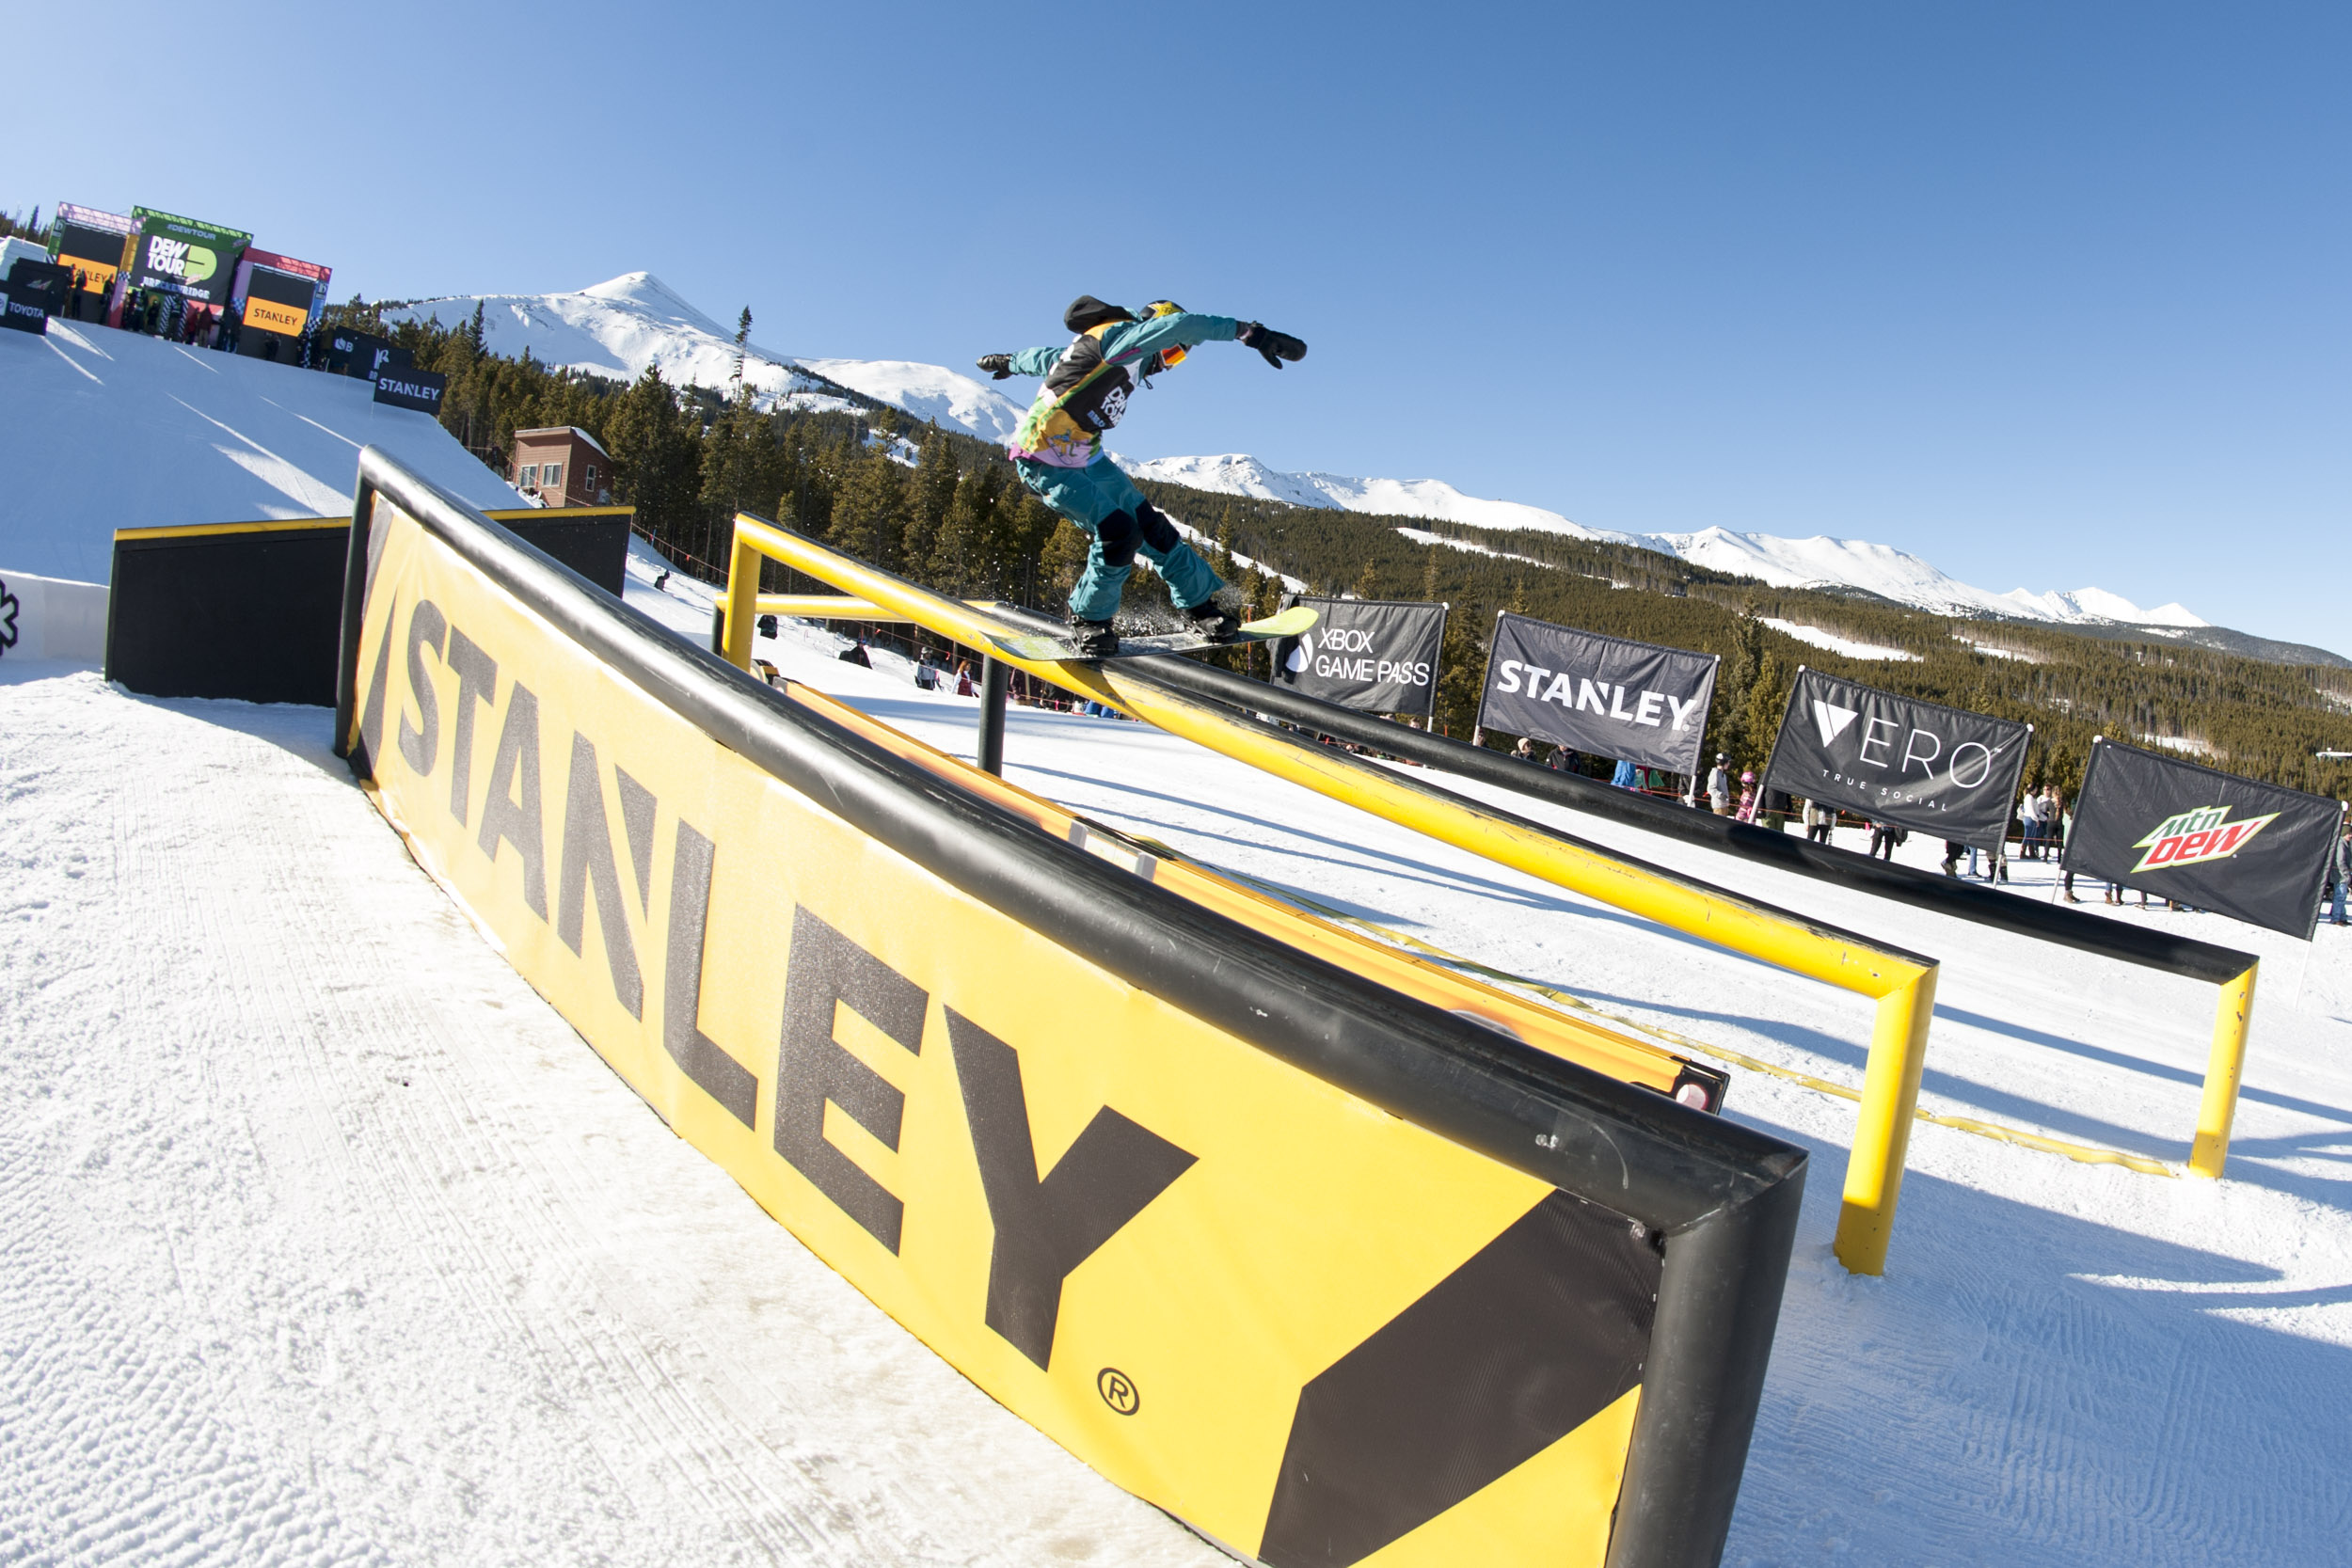 Mikey_Ciccarelli_Mens_Slopestyle_Pipe_Dew_Tour_Breck_Clavin22